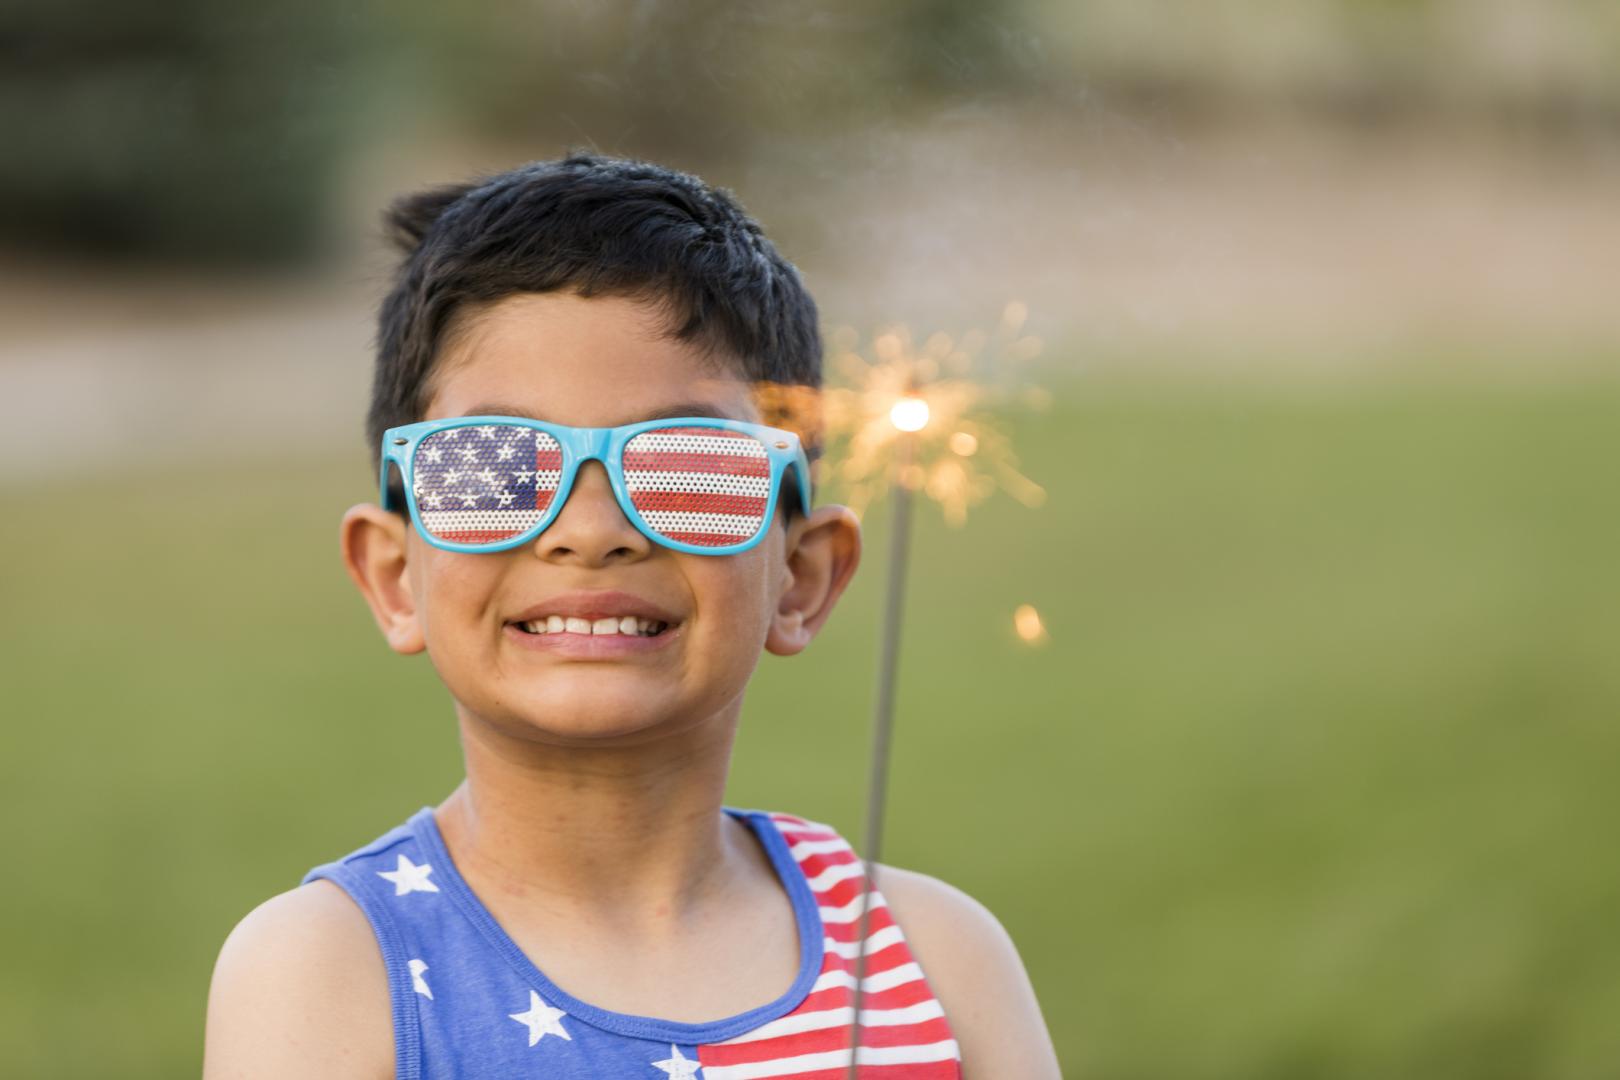 Plan your 4th of July Celebration Safely